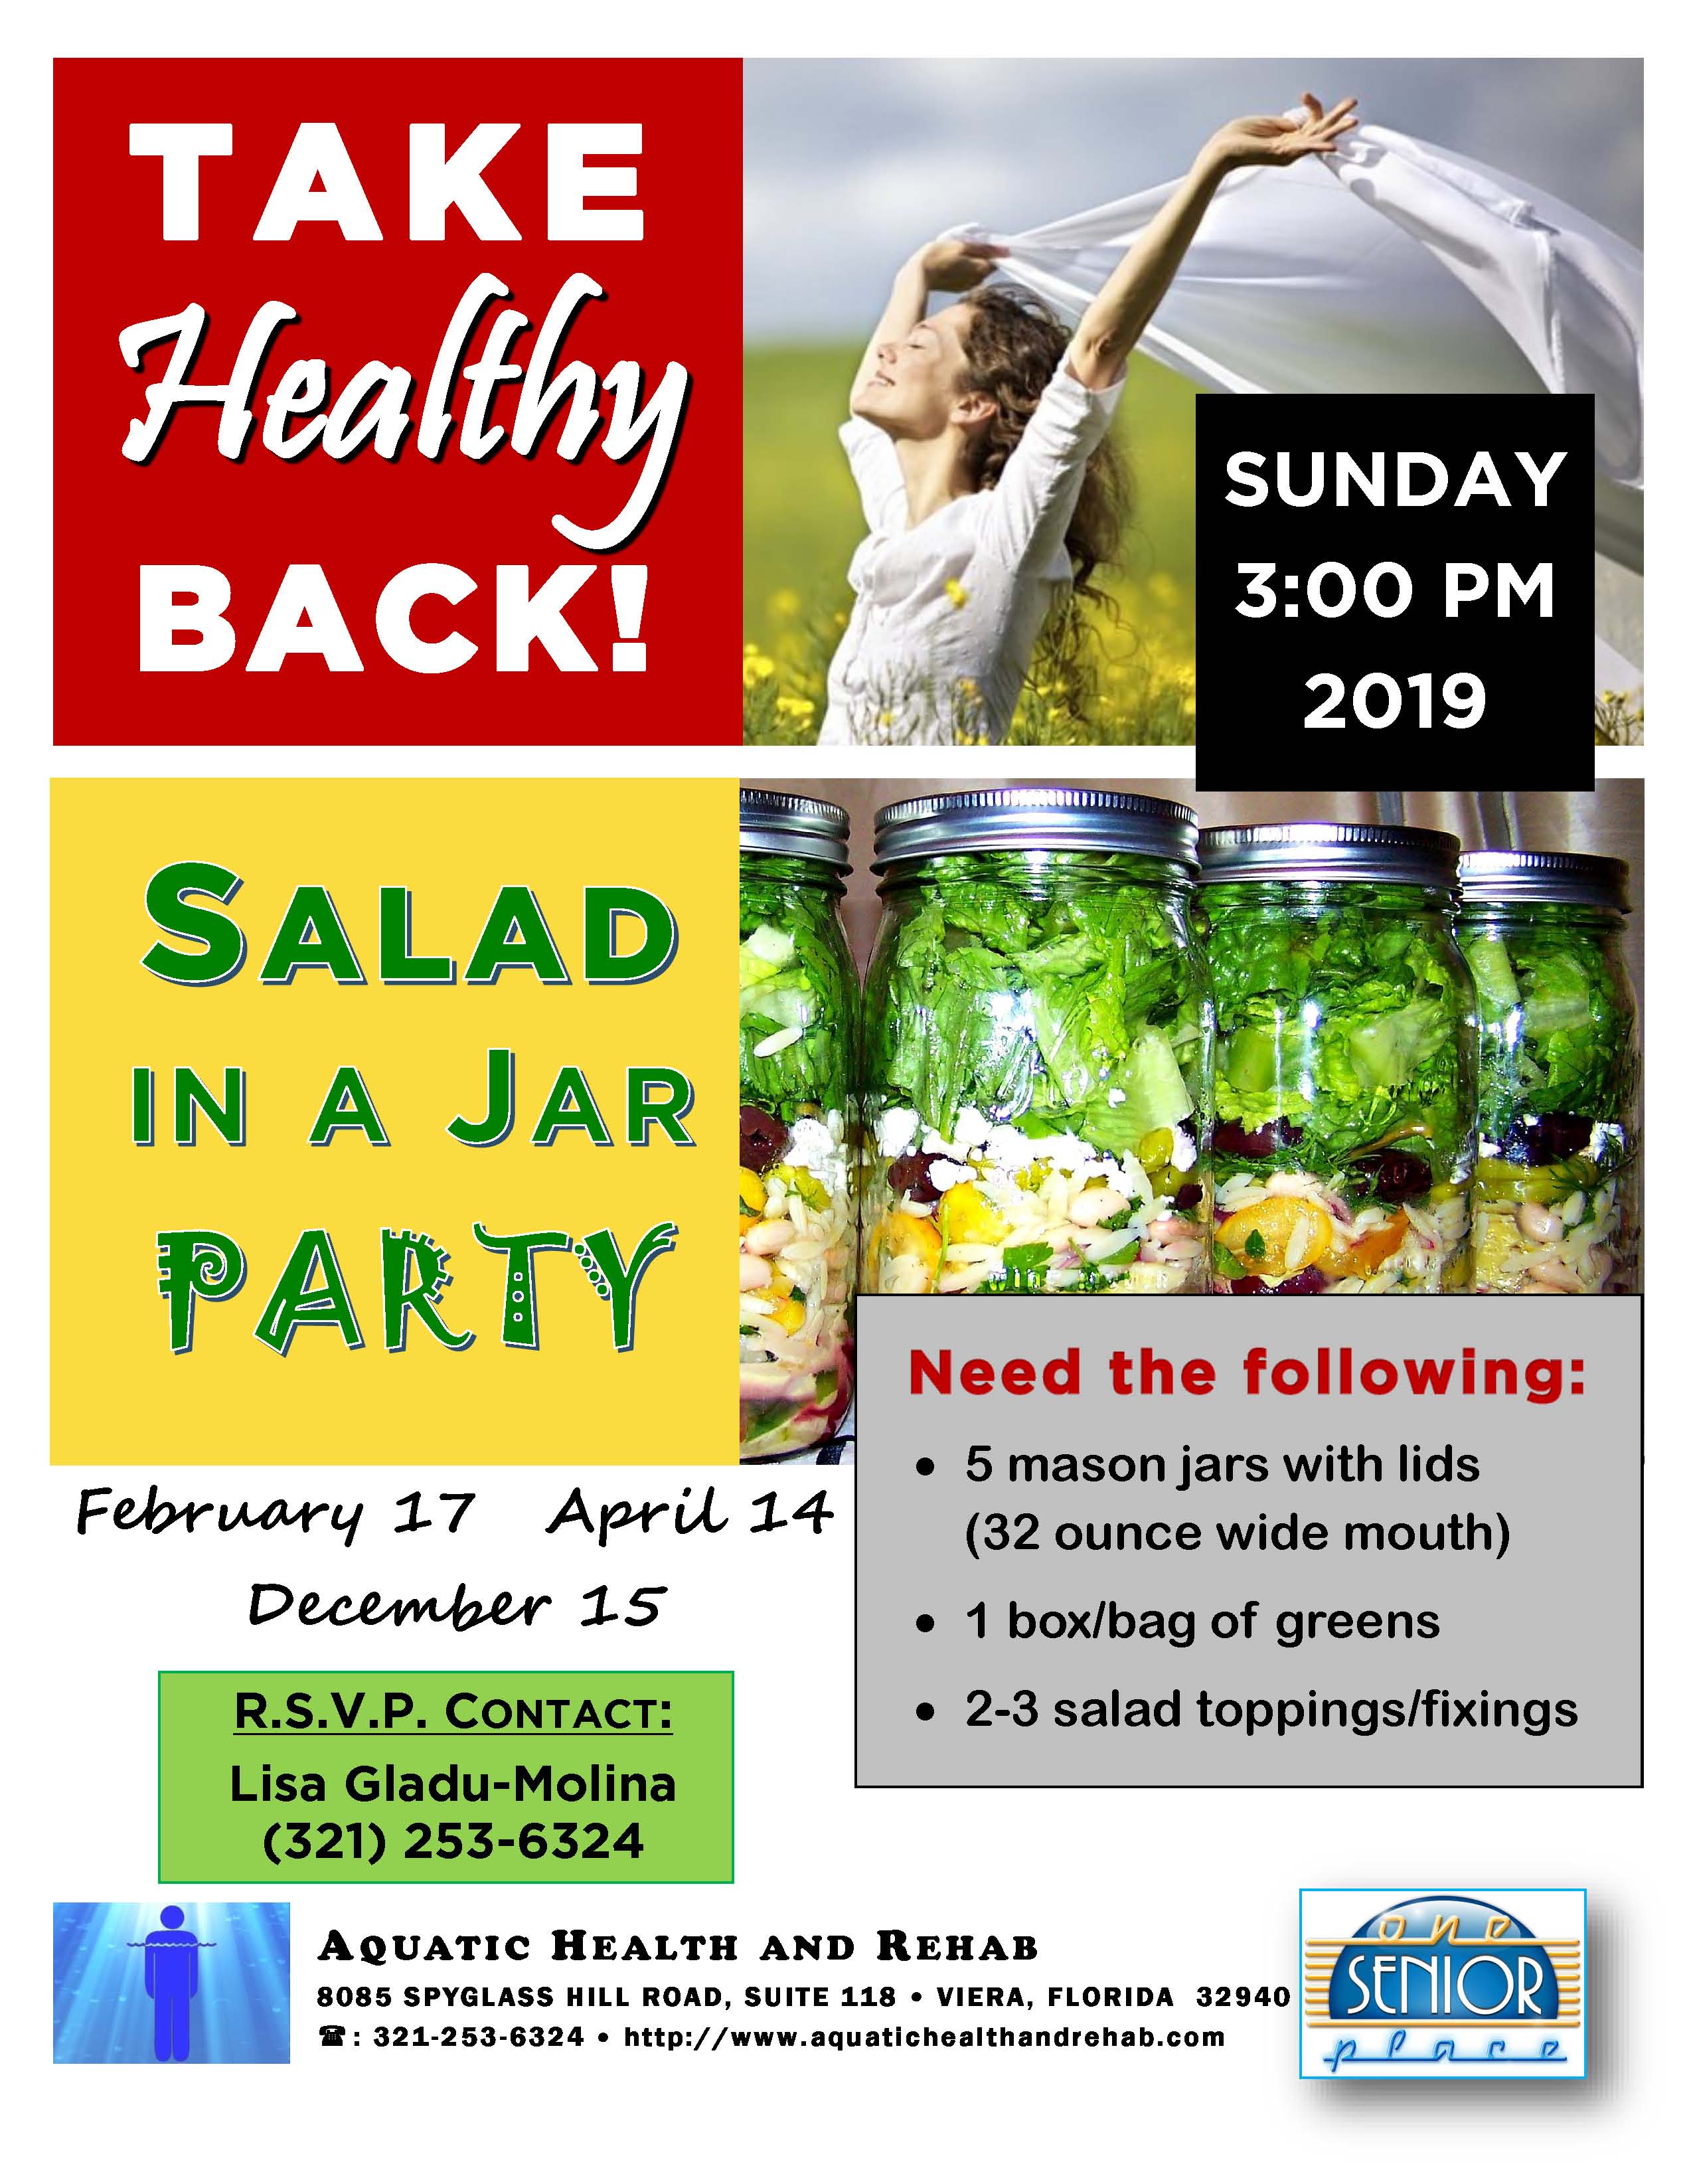 Take Healthy Back, Salad in a Jar Party with Aquatic Health